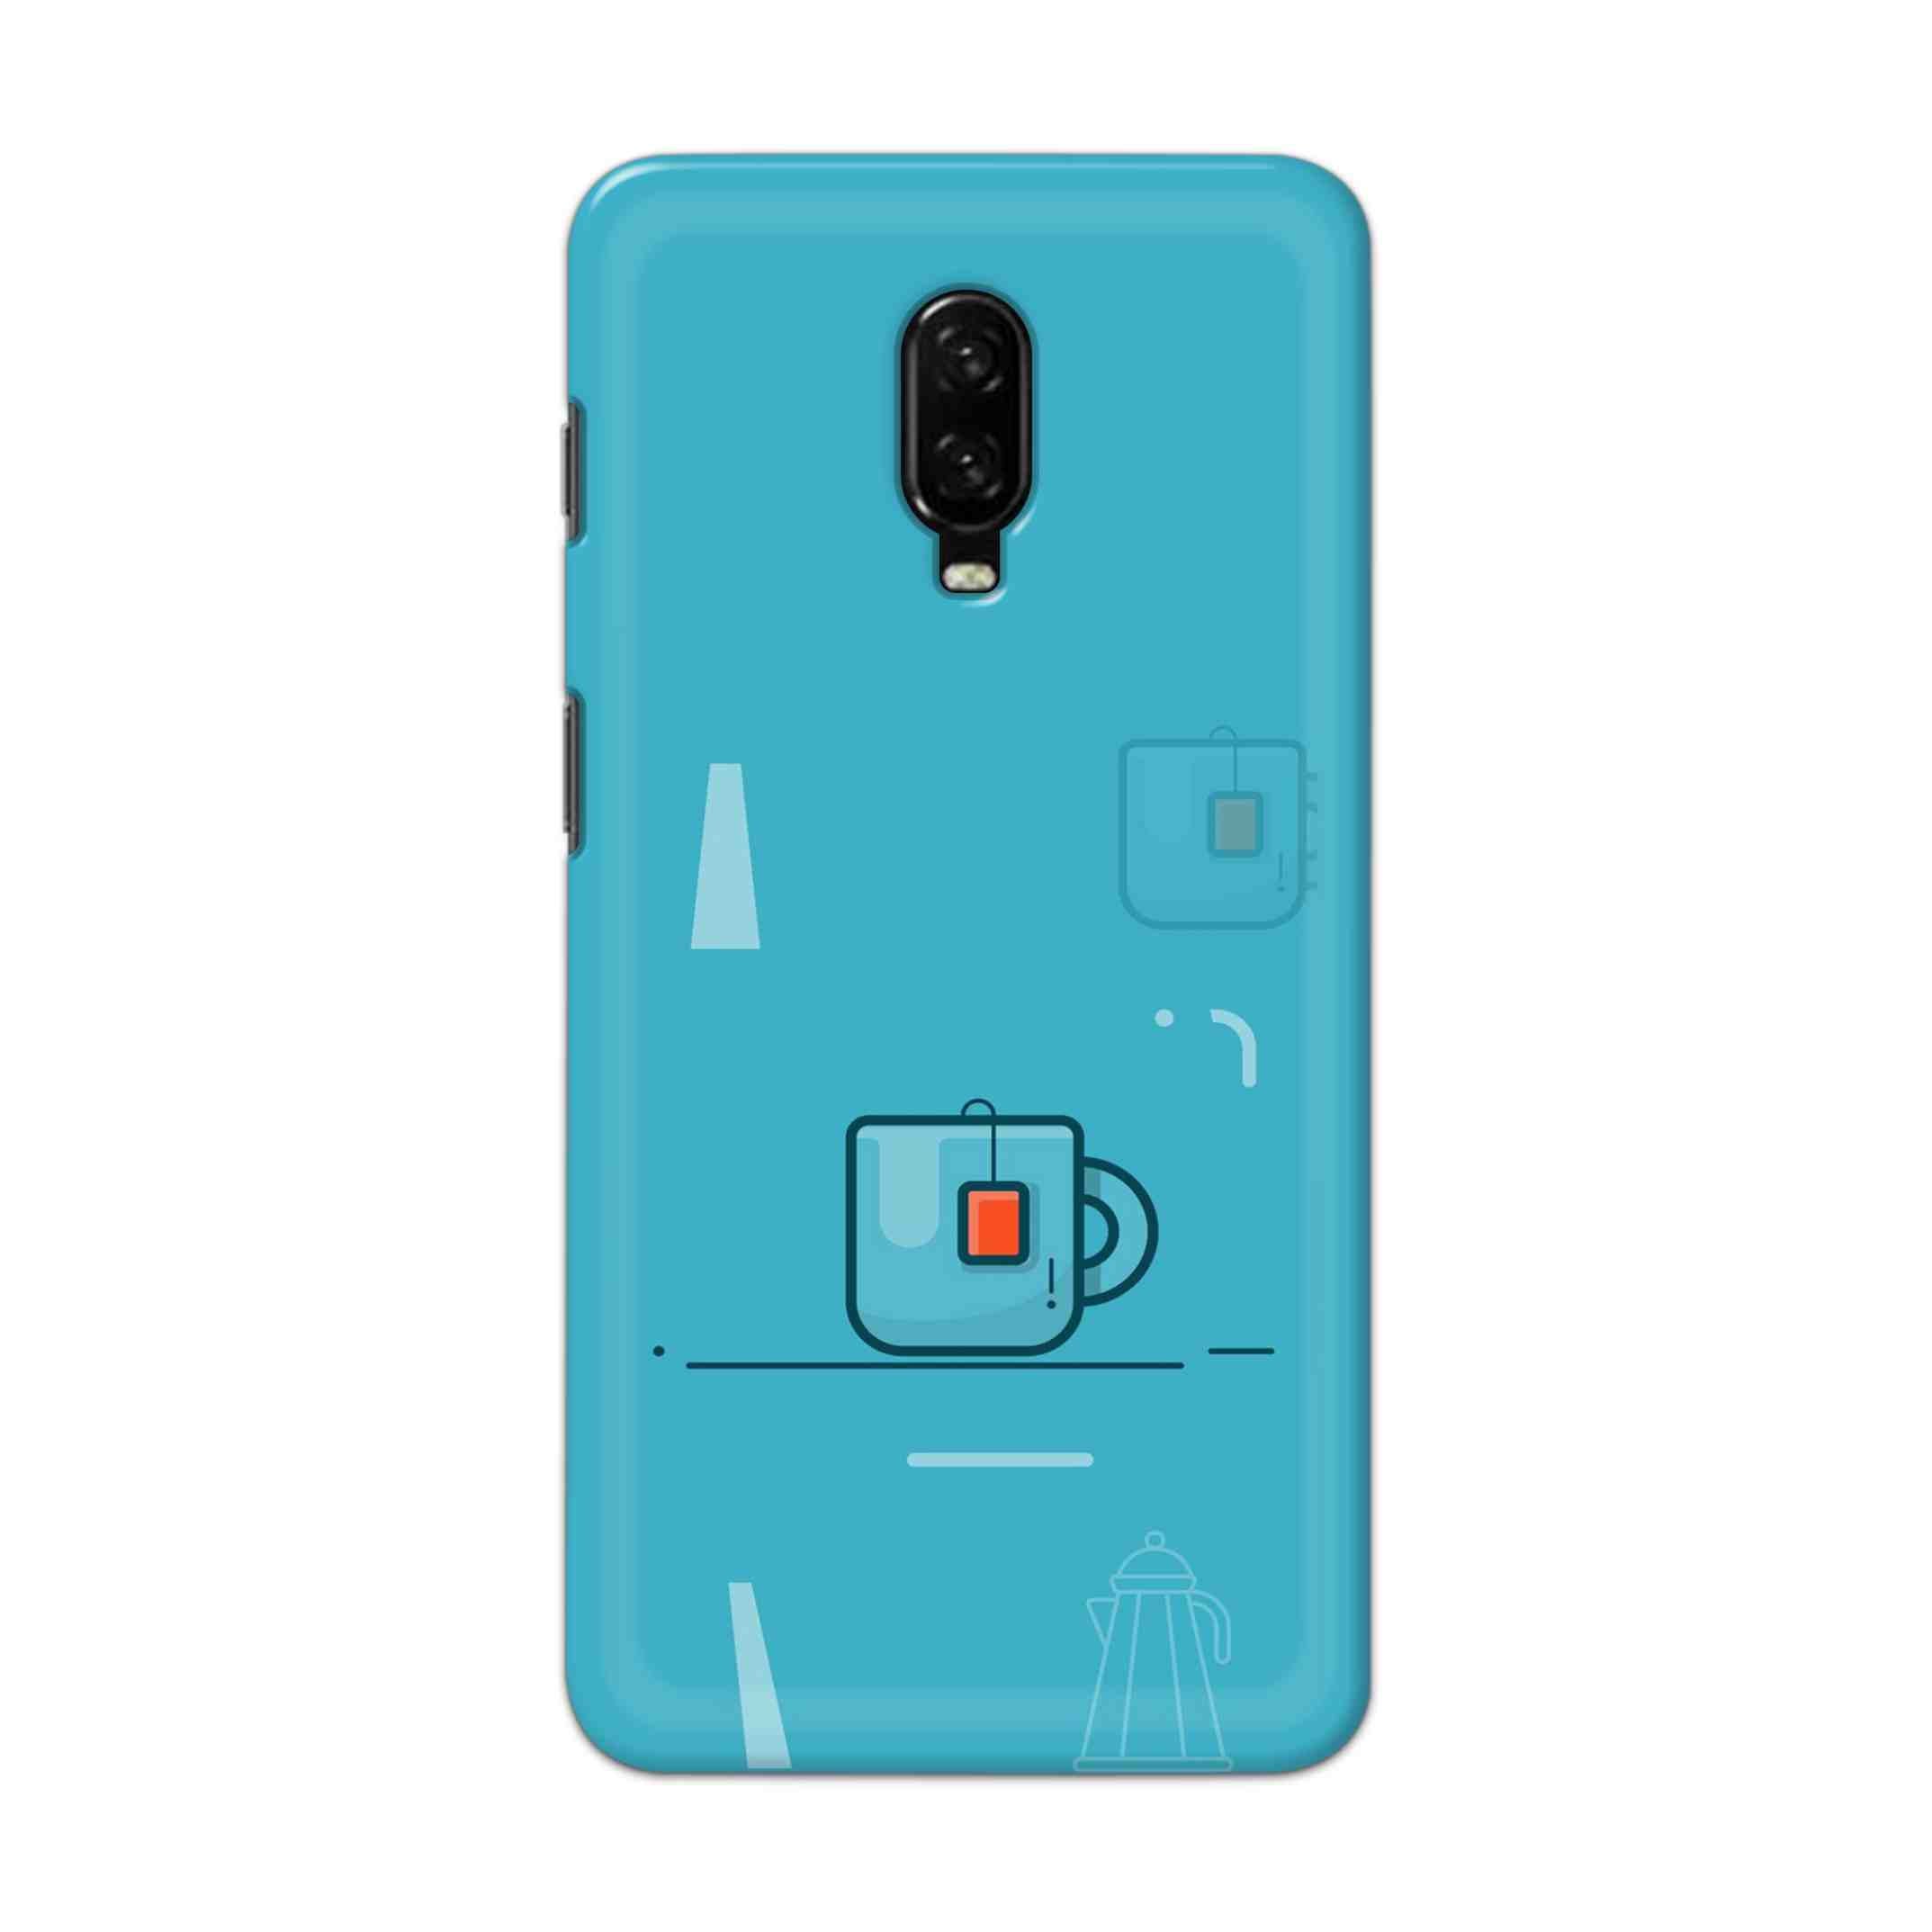 Buy Green Tea Hard Back Mobile Phone Case Cover For OnePlus 6T Online